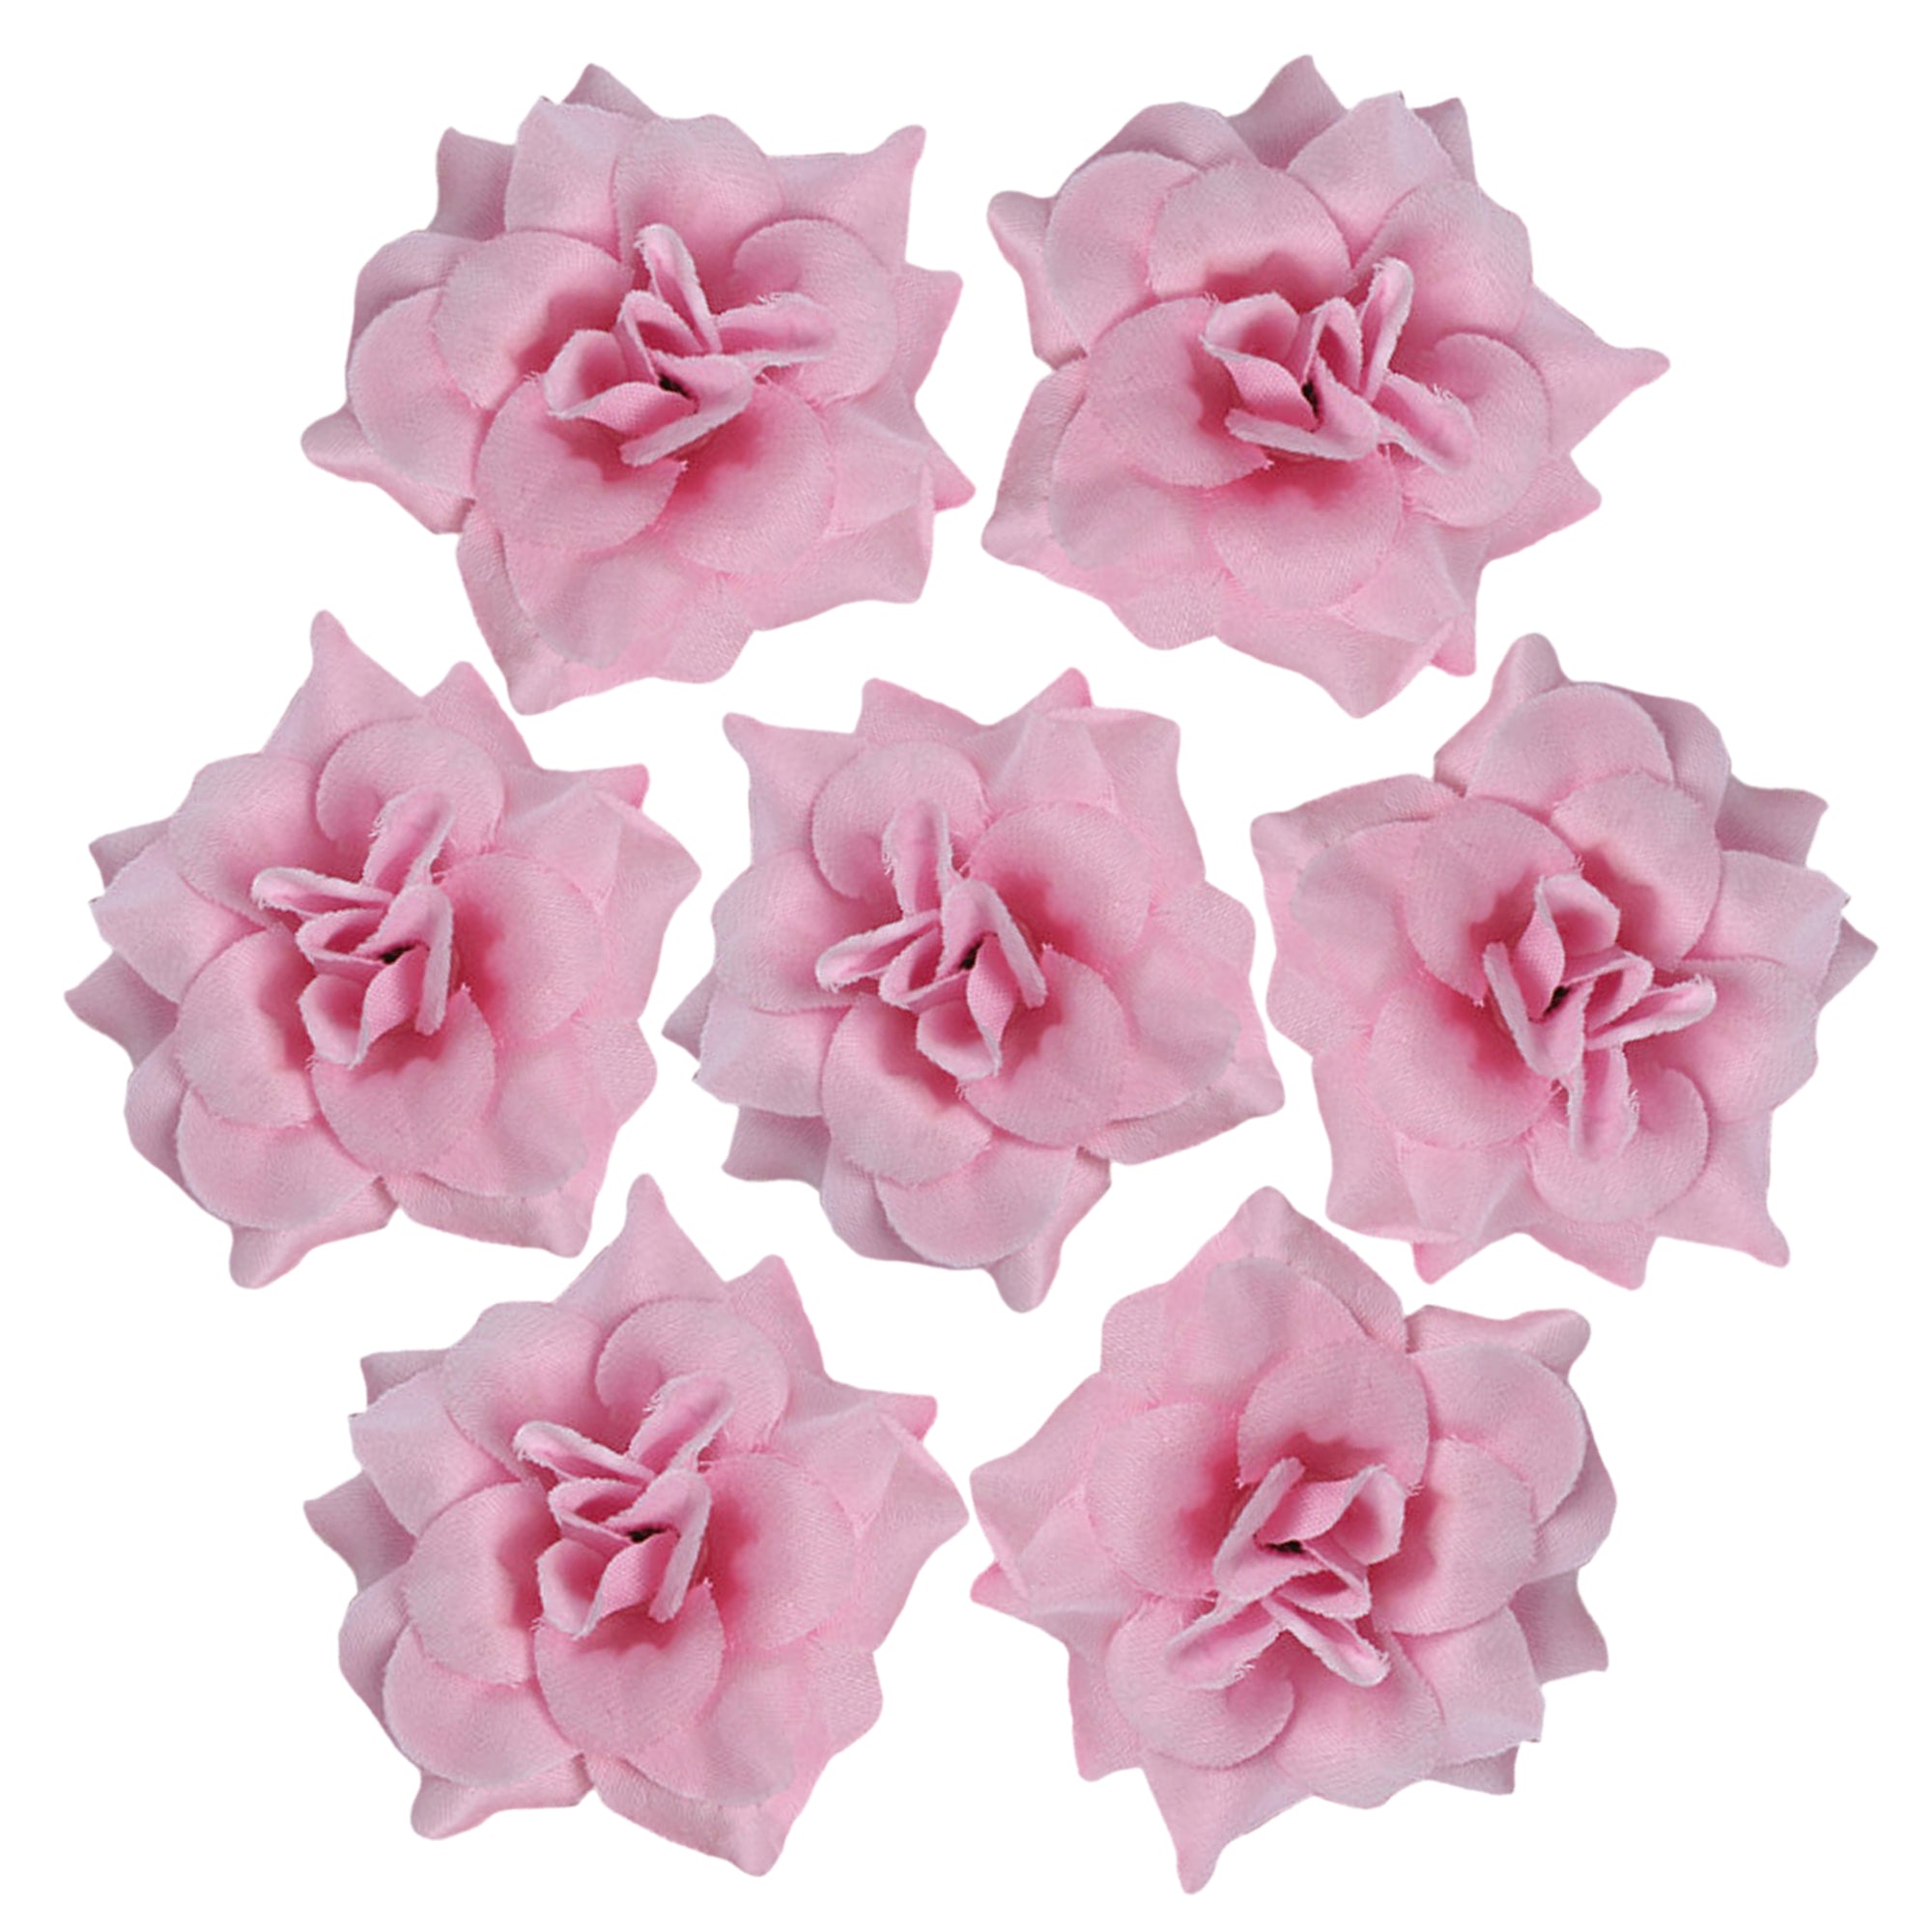 Small Silk Roses Flowers in Bulk Flocking Flowers 100 pcs for Hairpins Crafts